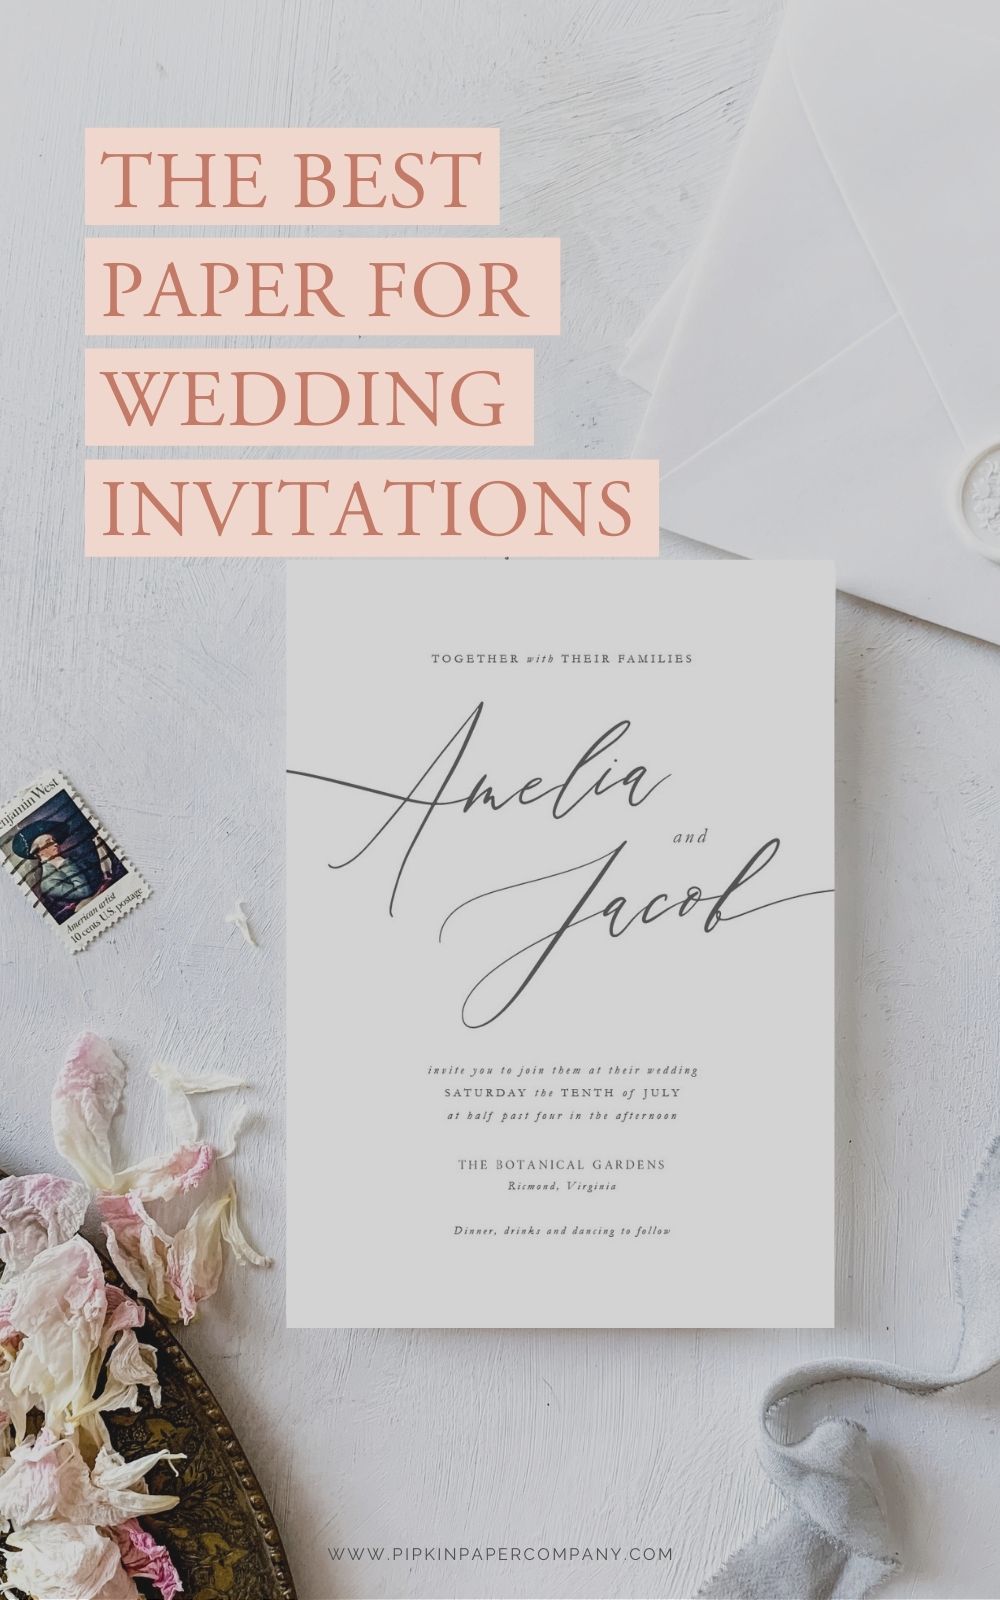 Cardstock 101: How to Choose Paper for Wedding Invitations | Pipkin Paper Company